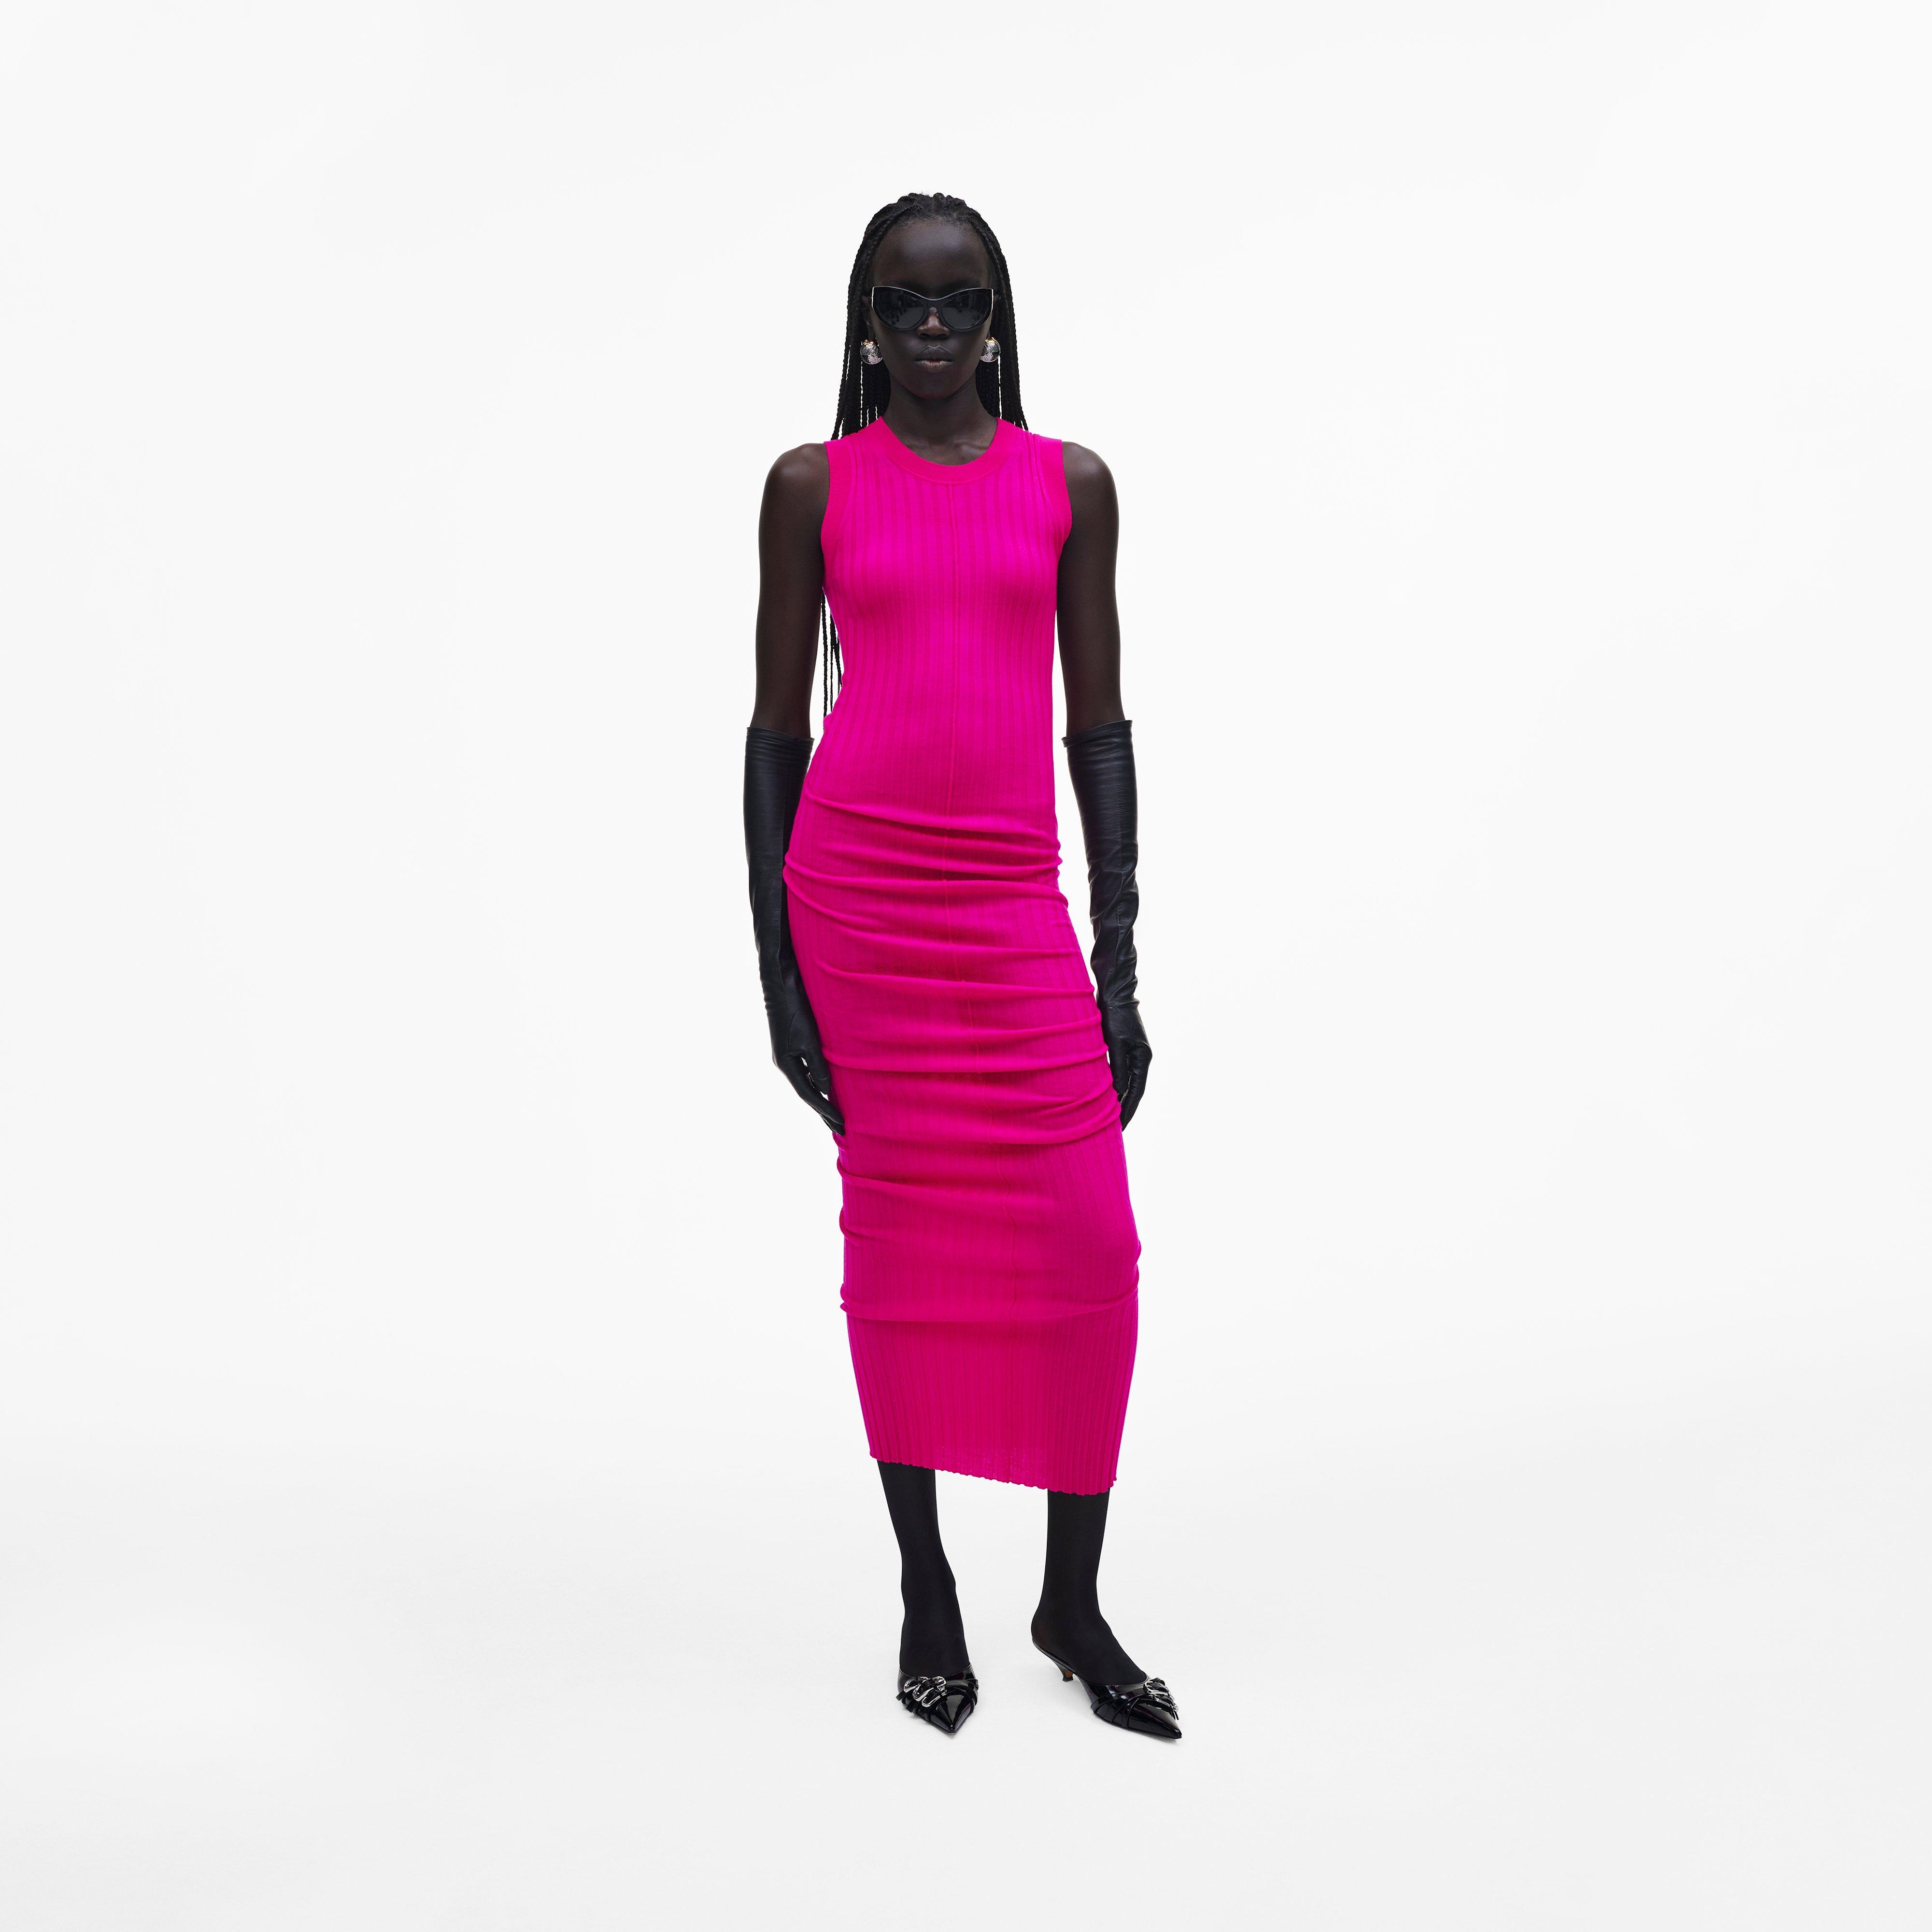 Marc by Marc jacobs Fine Ribbed Merino Twisted Dress,HOT PINK